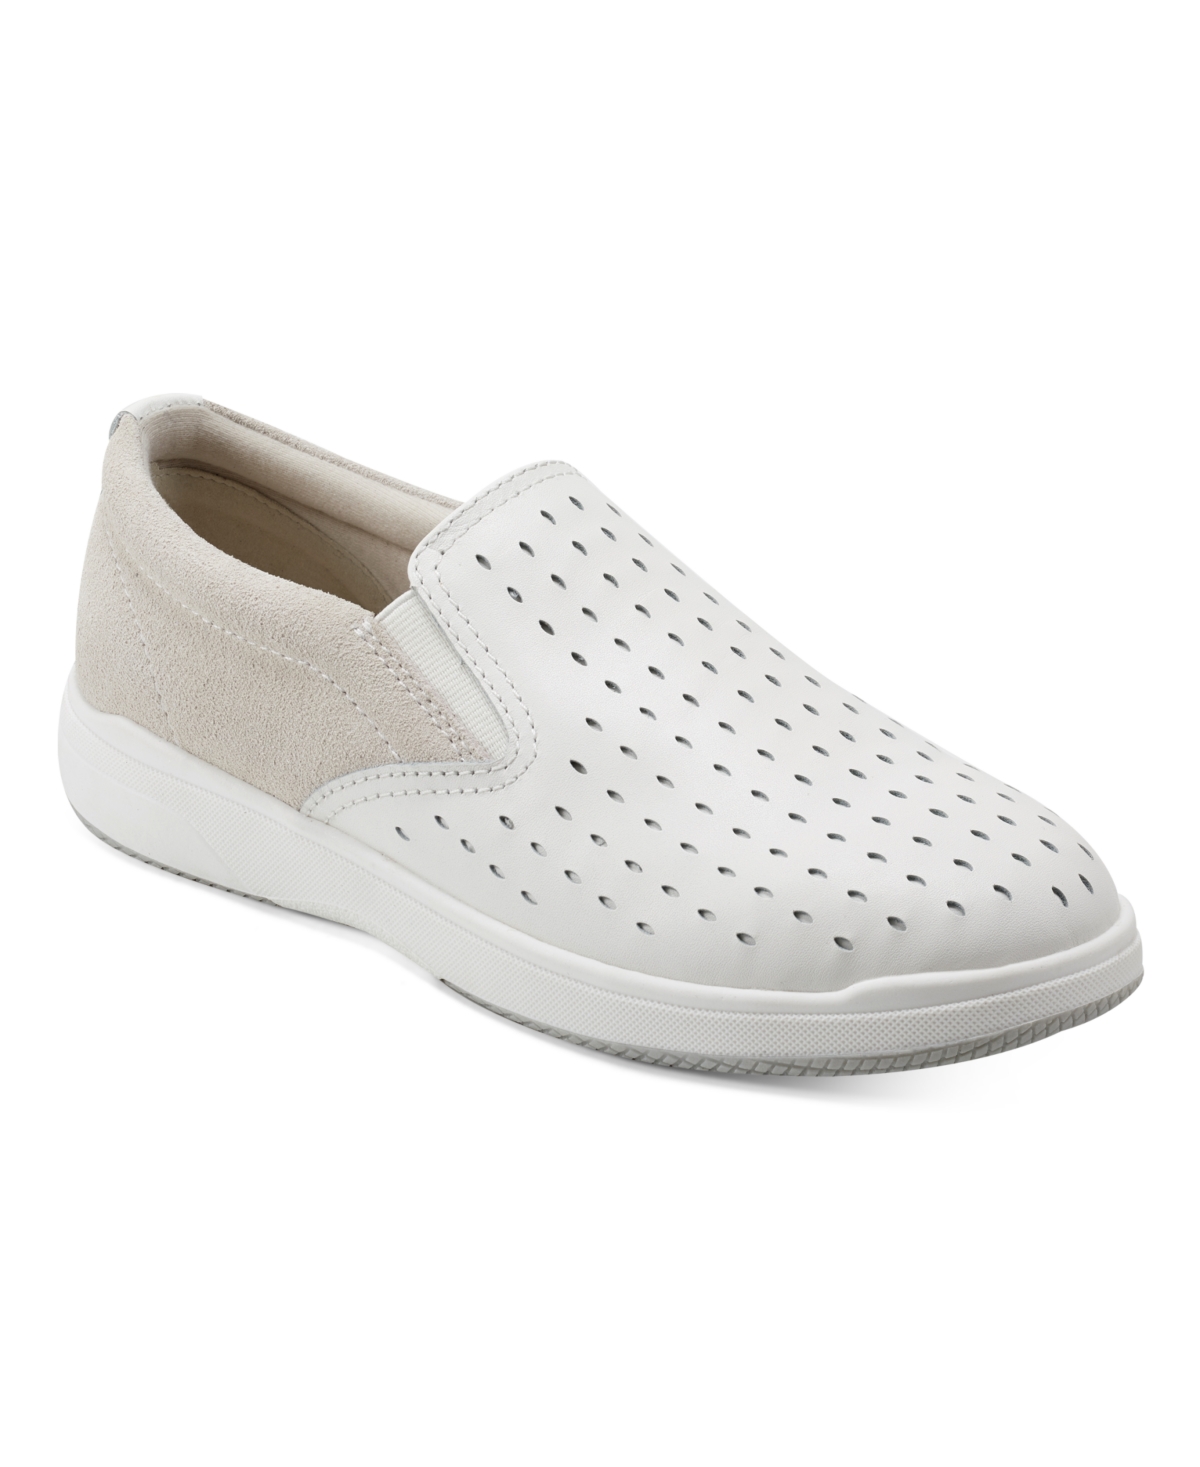 Earth Women's Nel Laser Cut Round Toe Casual Slip-On Sneakers - Light Natural Nubuck